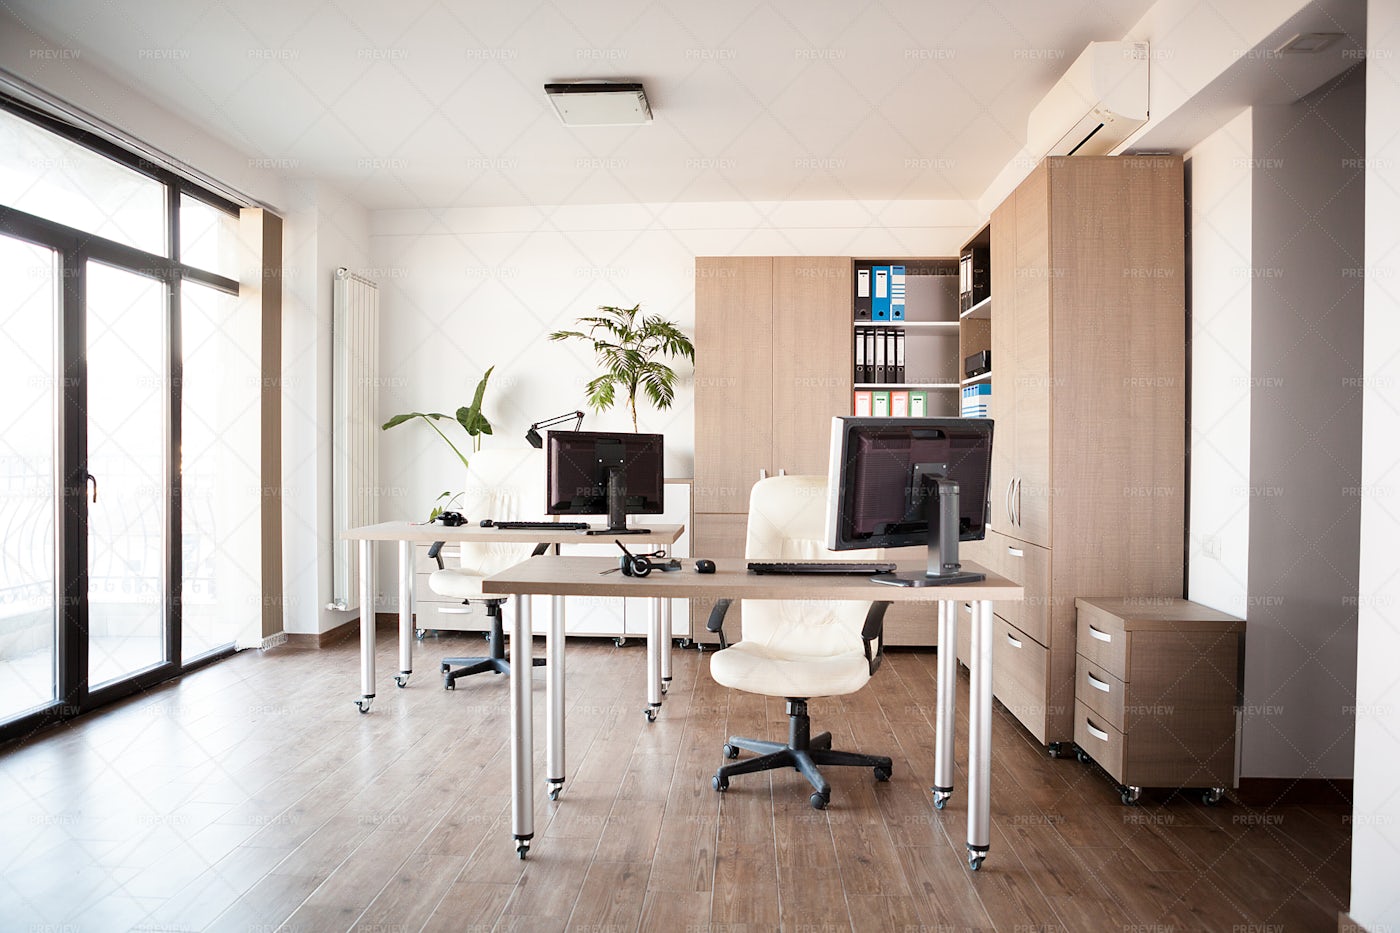 Clean Office Space: Stock Photos